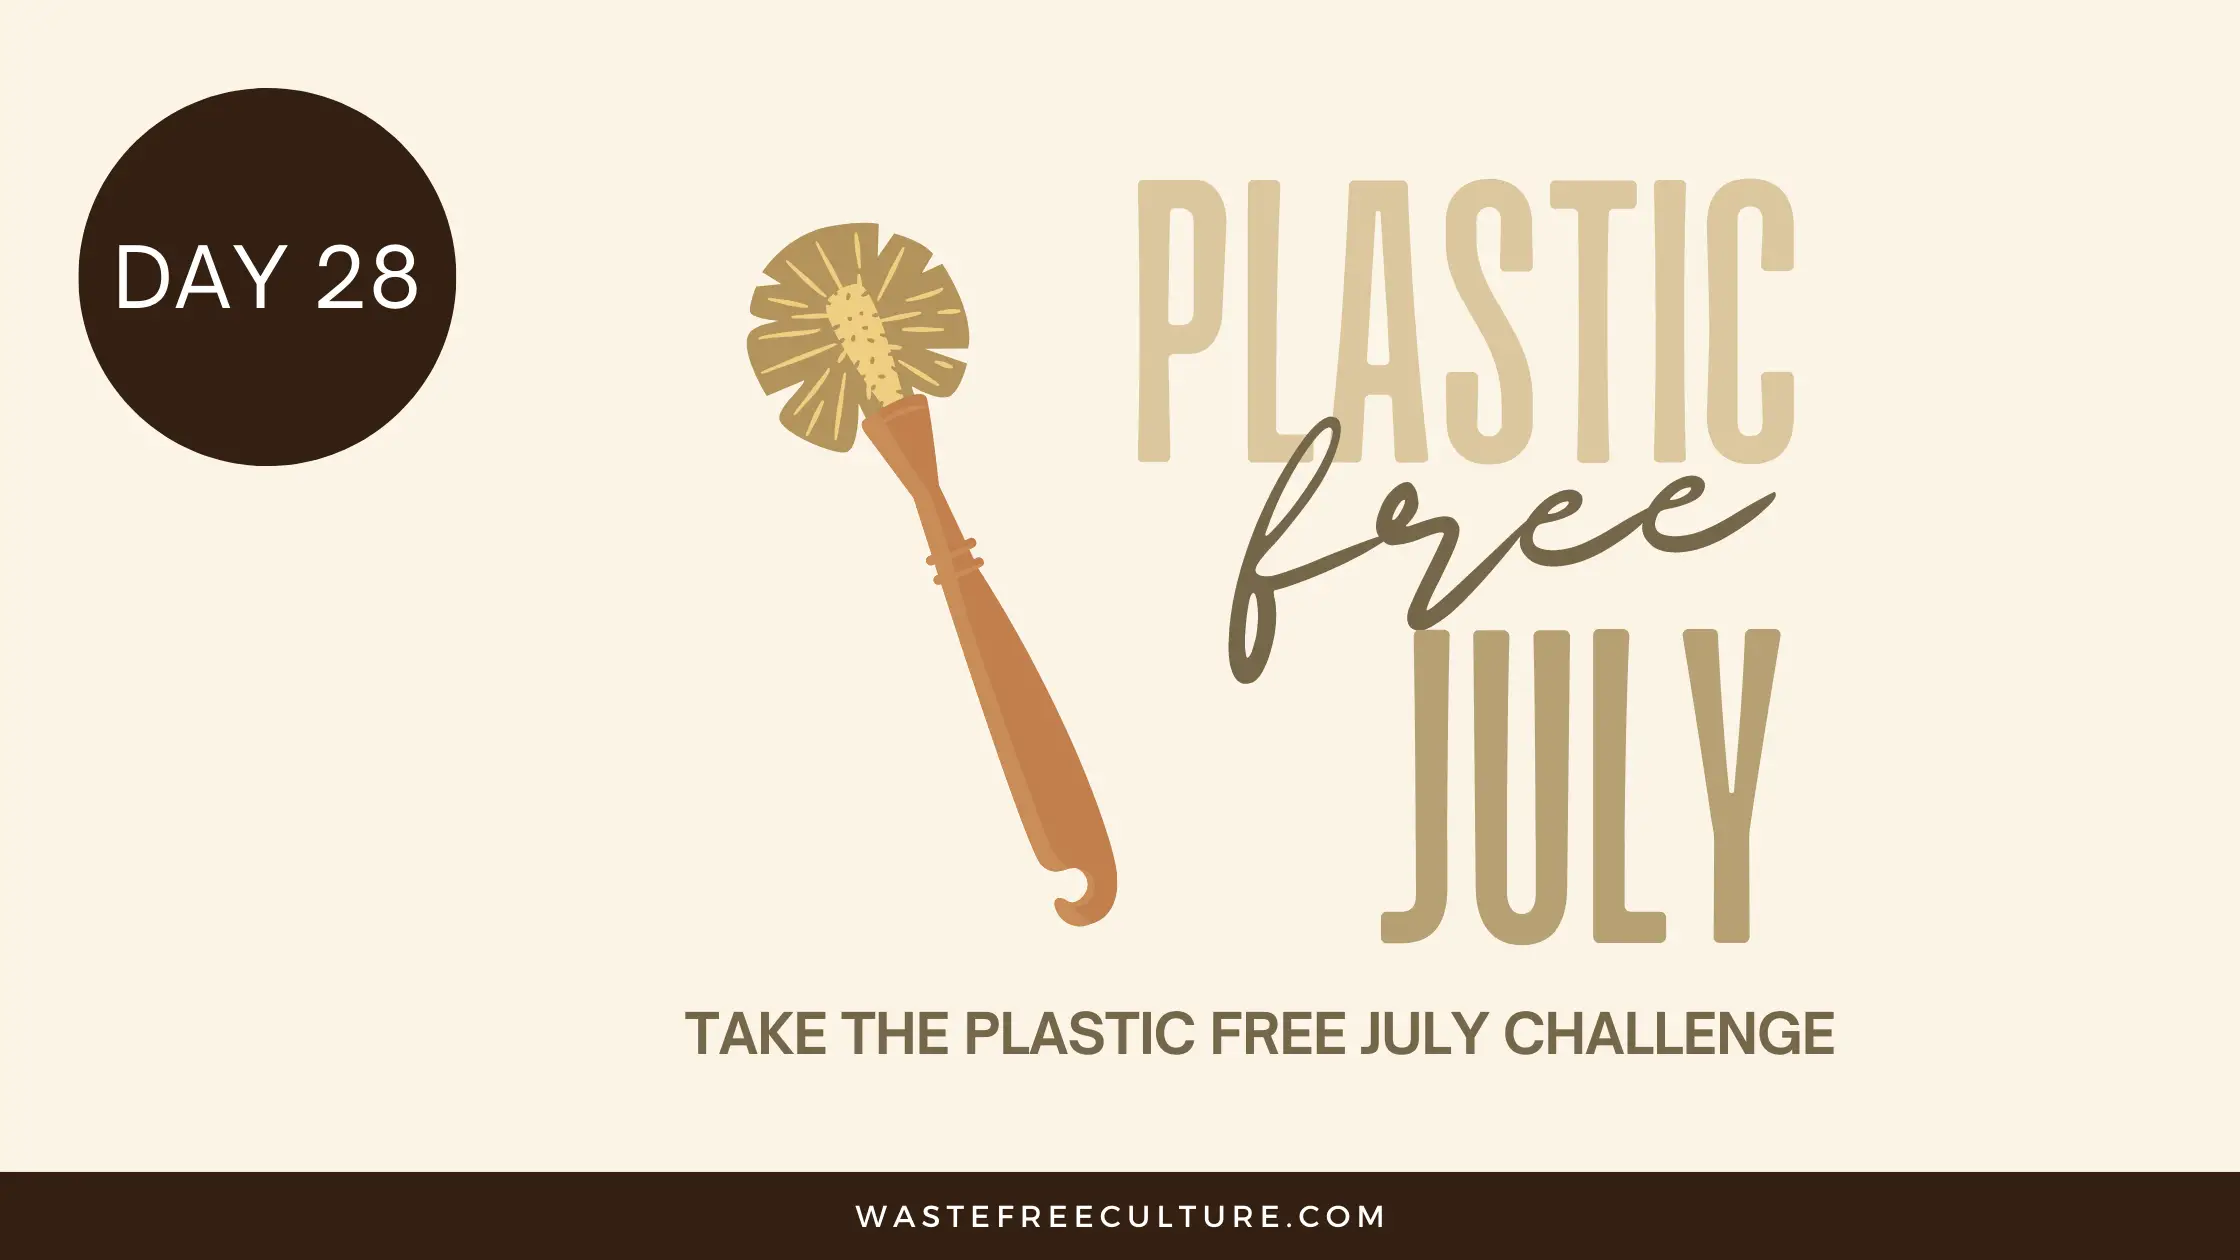 Day 28 of the Plastic Free July Challenge